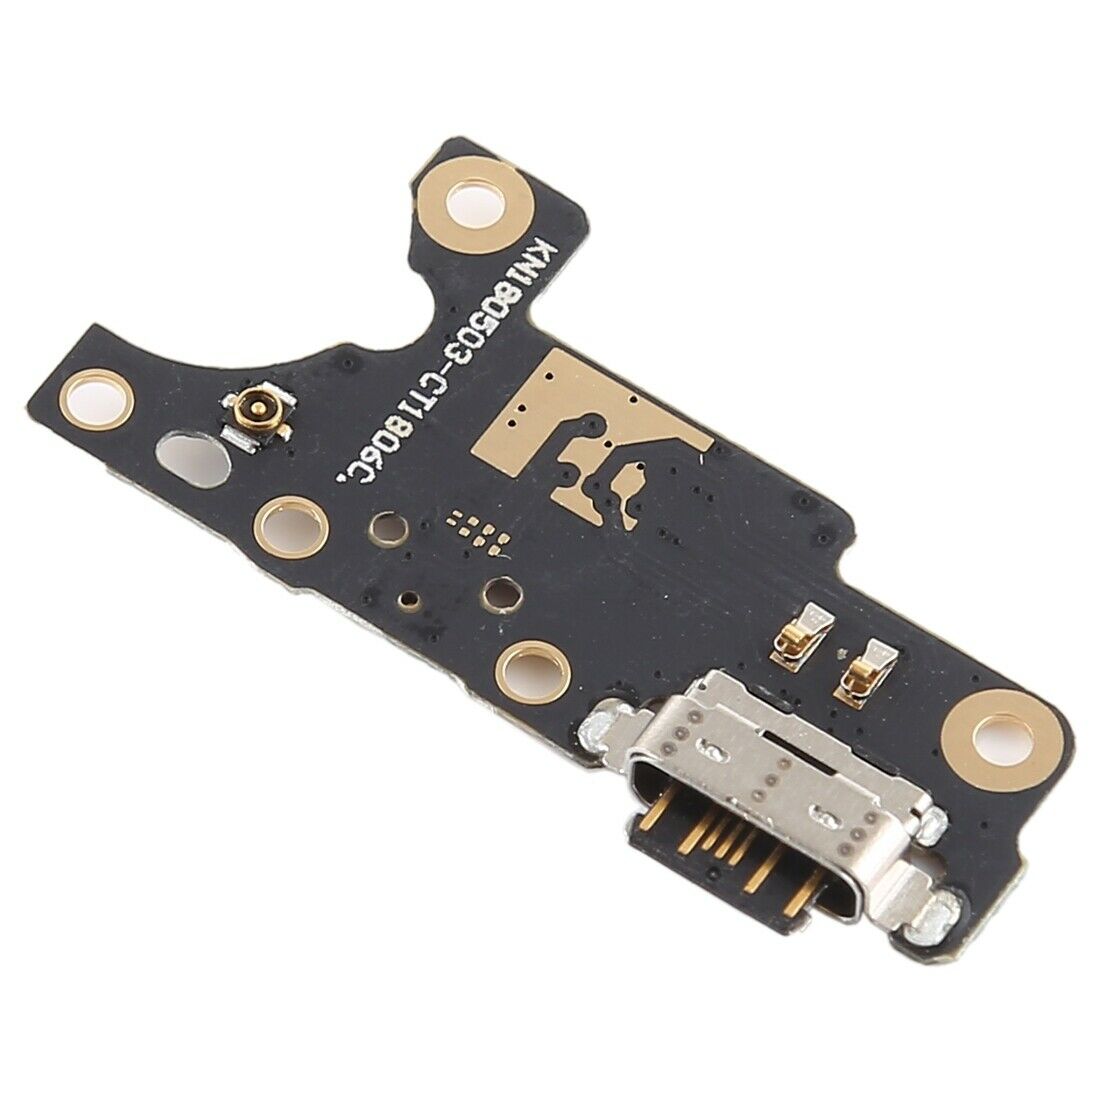 Nokia 7 Plus Charging Port Board With Mic for [product_price] - First Help Tech